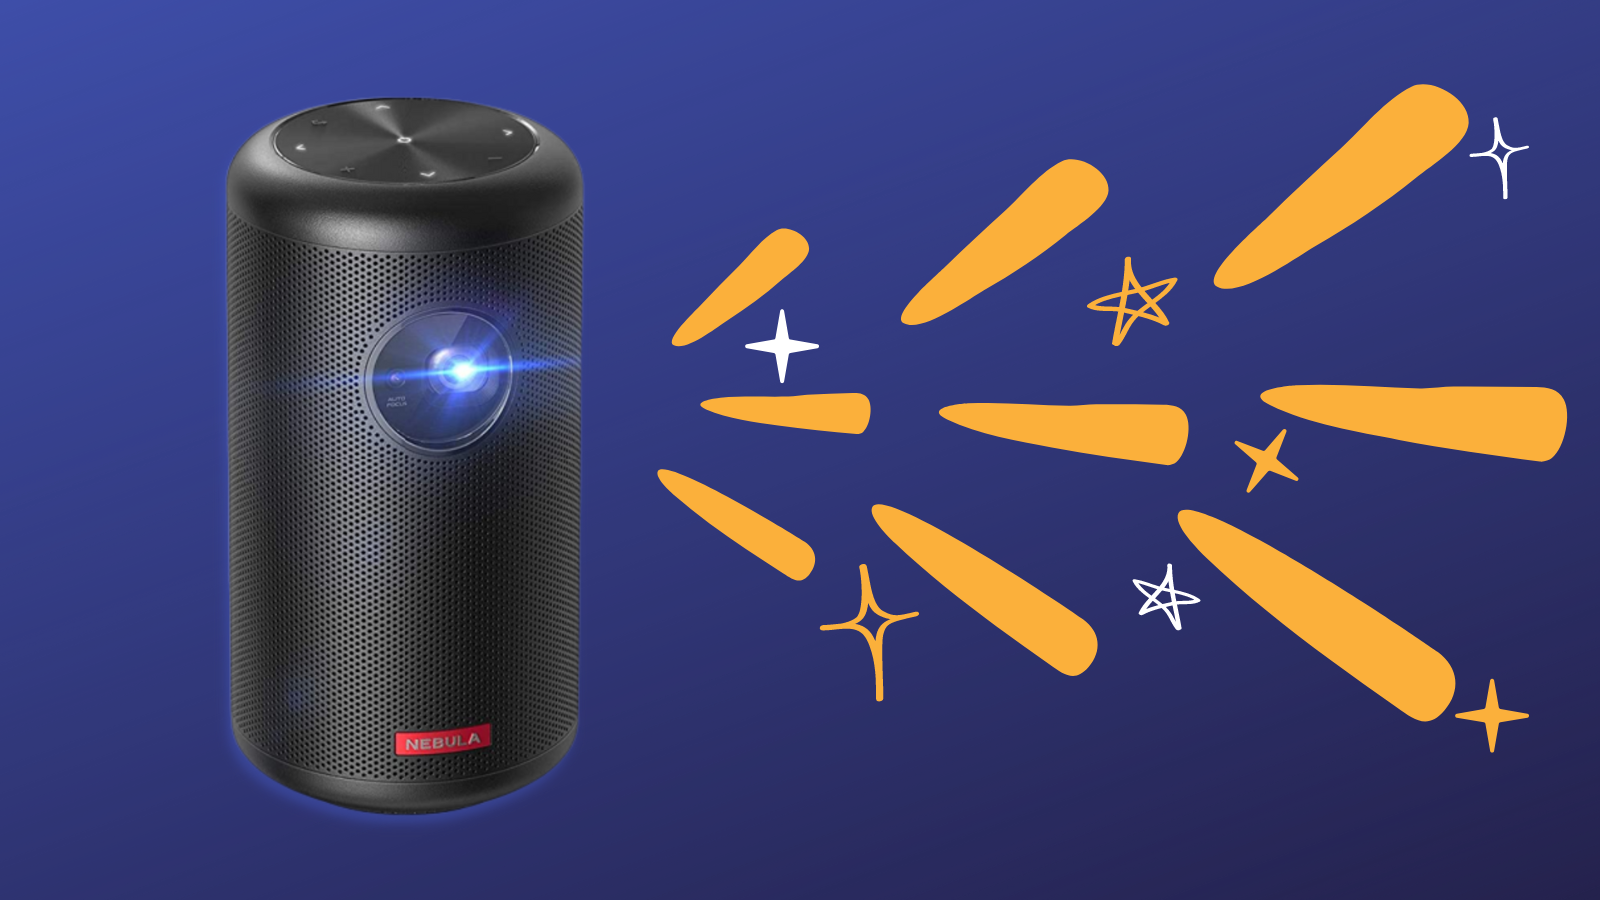 Anker’s Nebula Capsule II projector is down to a very good price